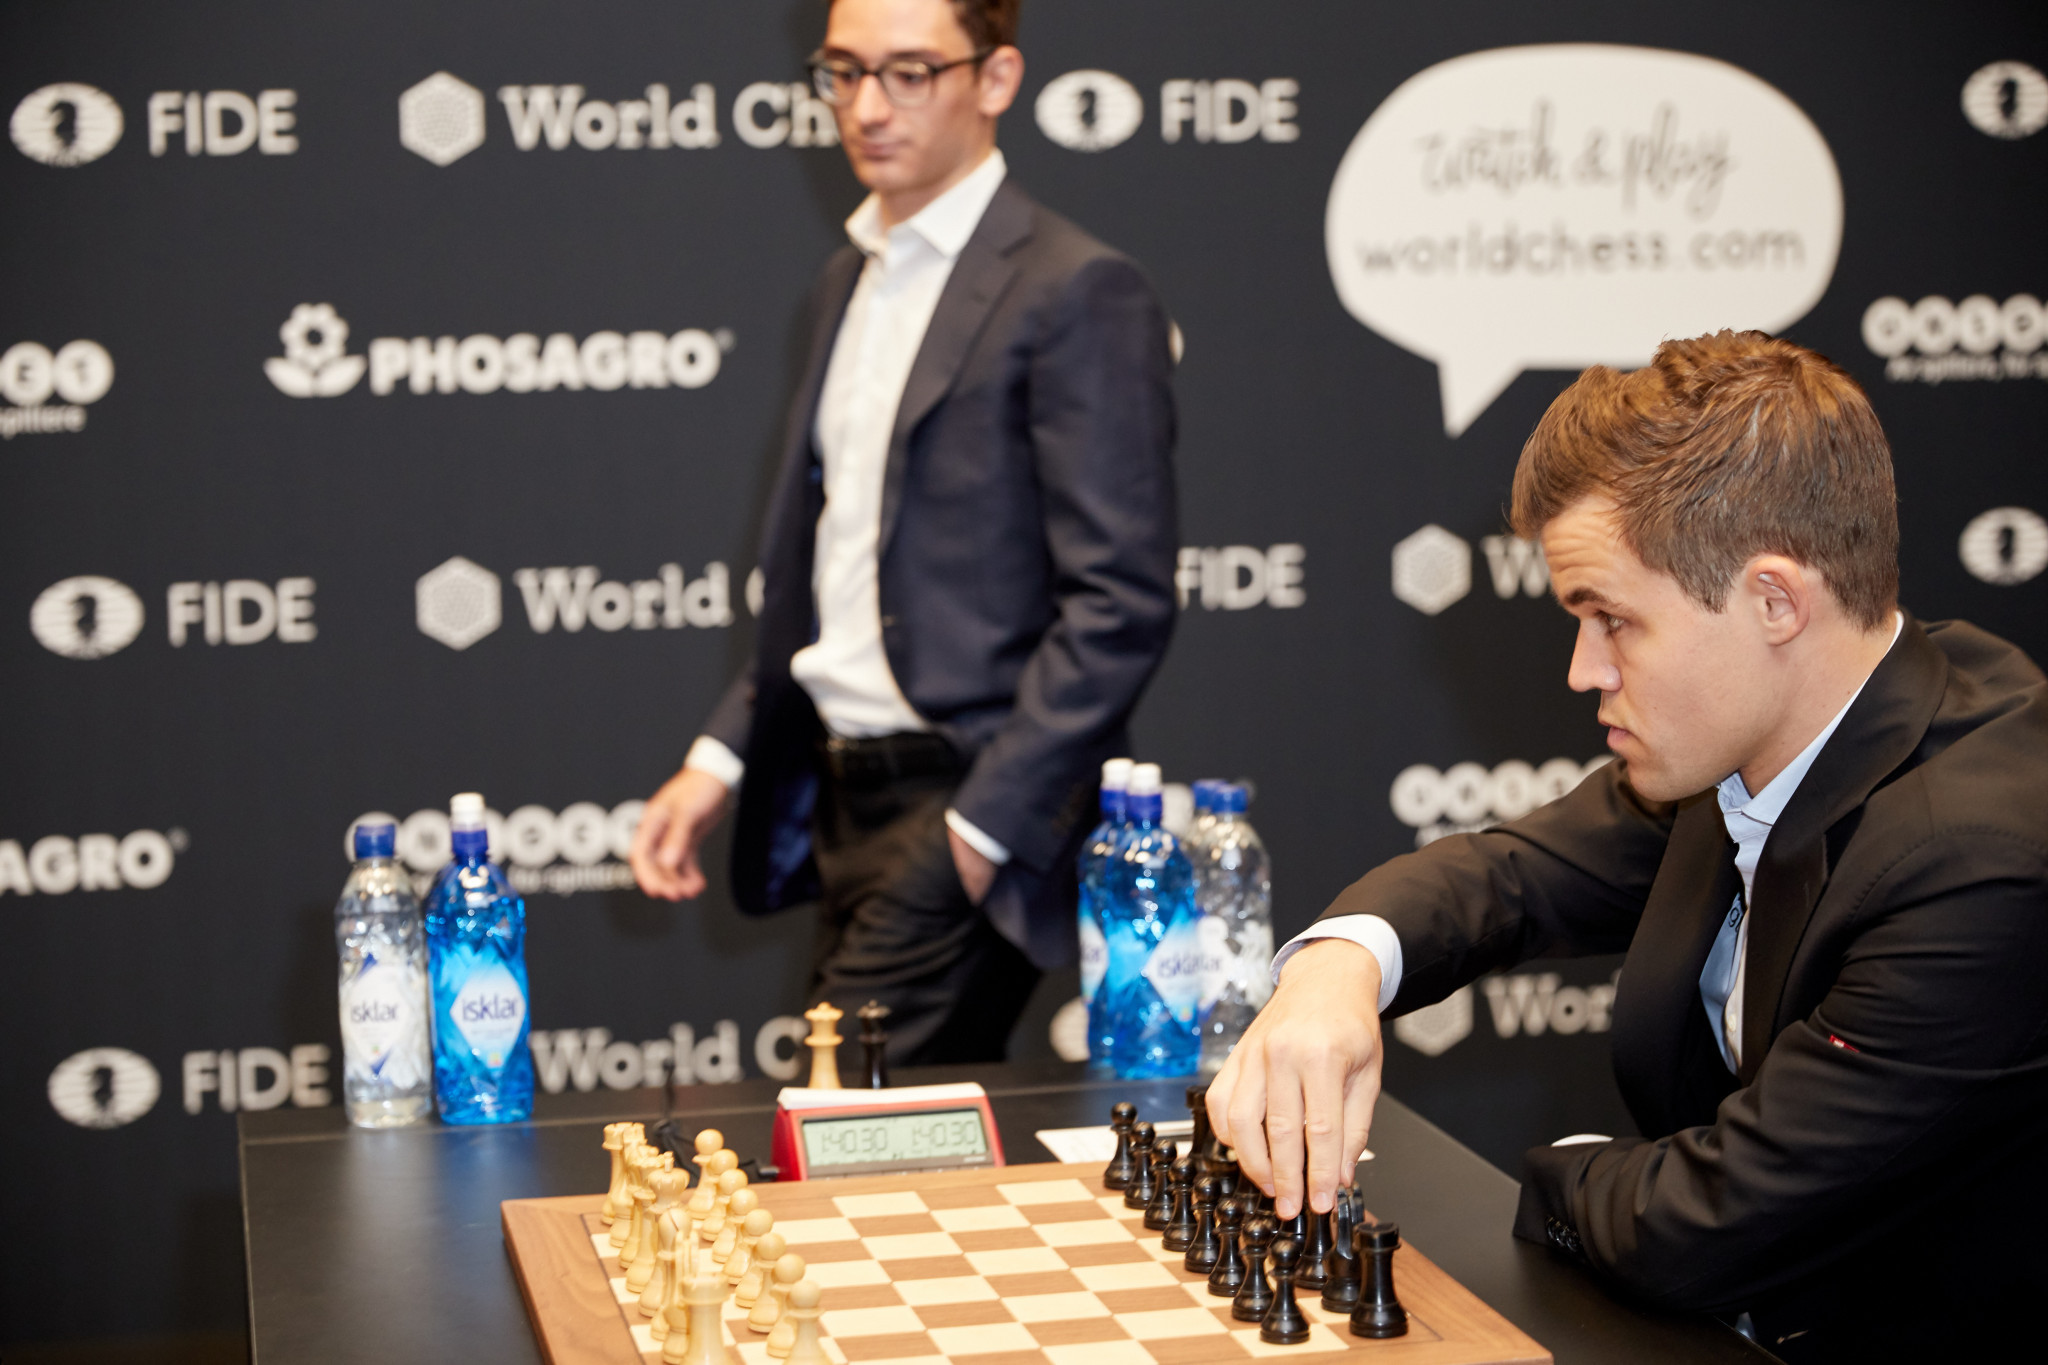 America's Fabiano Caruana is locked in a tense struggle with Norway's Magnus Carlsen for the World Chess Championship after a record 11 straight draws in London ©Getty Images